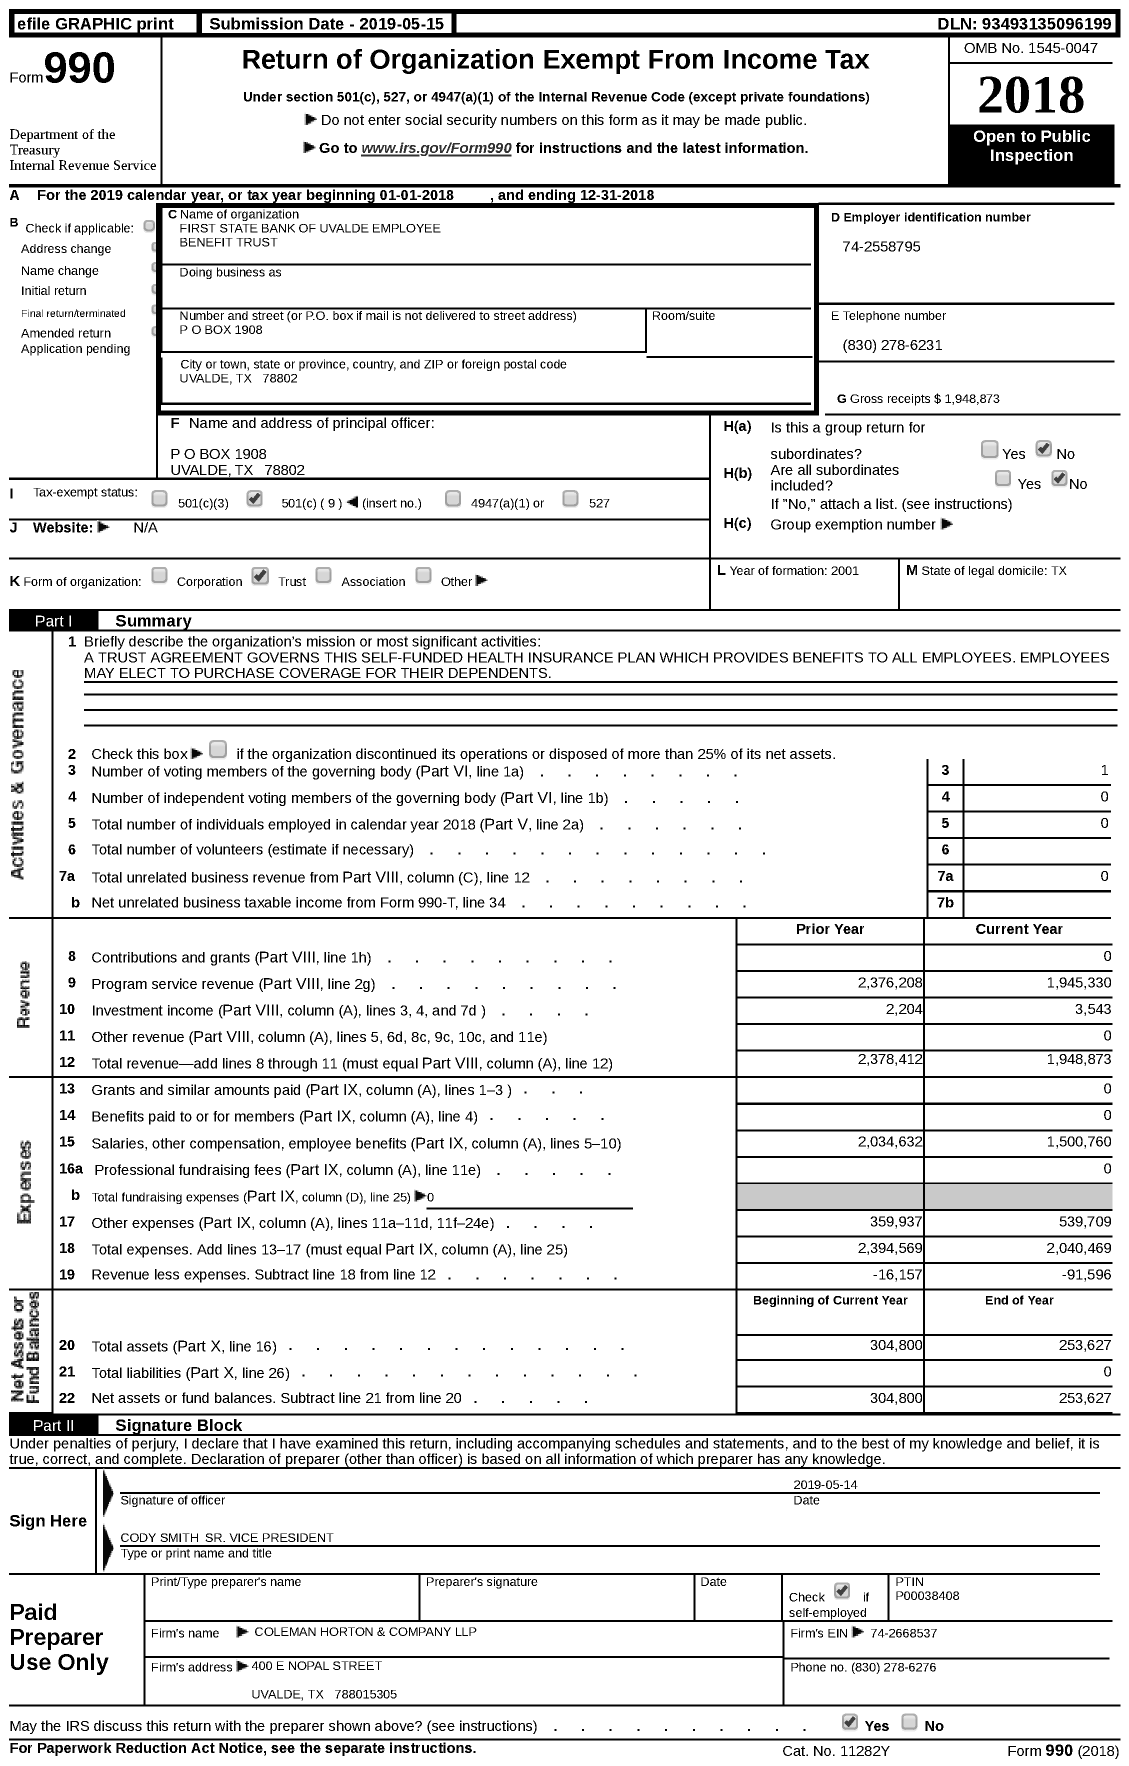 Image of first page of 2018 Form 990 for First State Bank of Uvalde Employee Benefit Trust